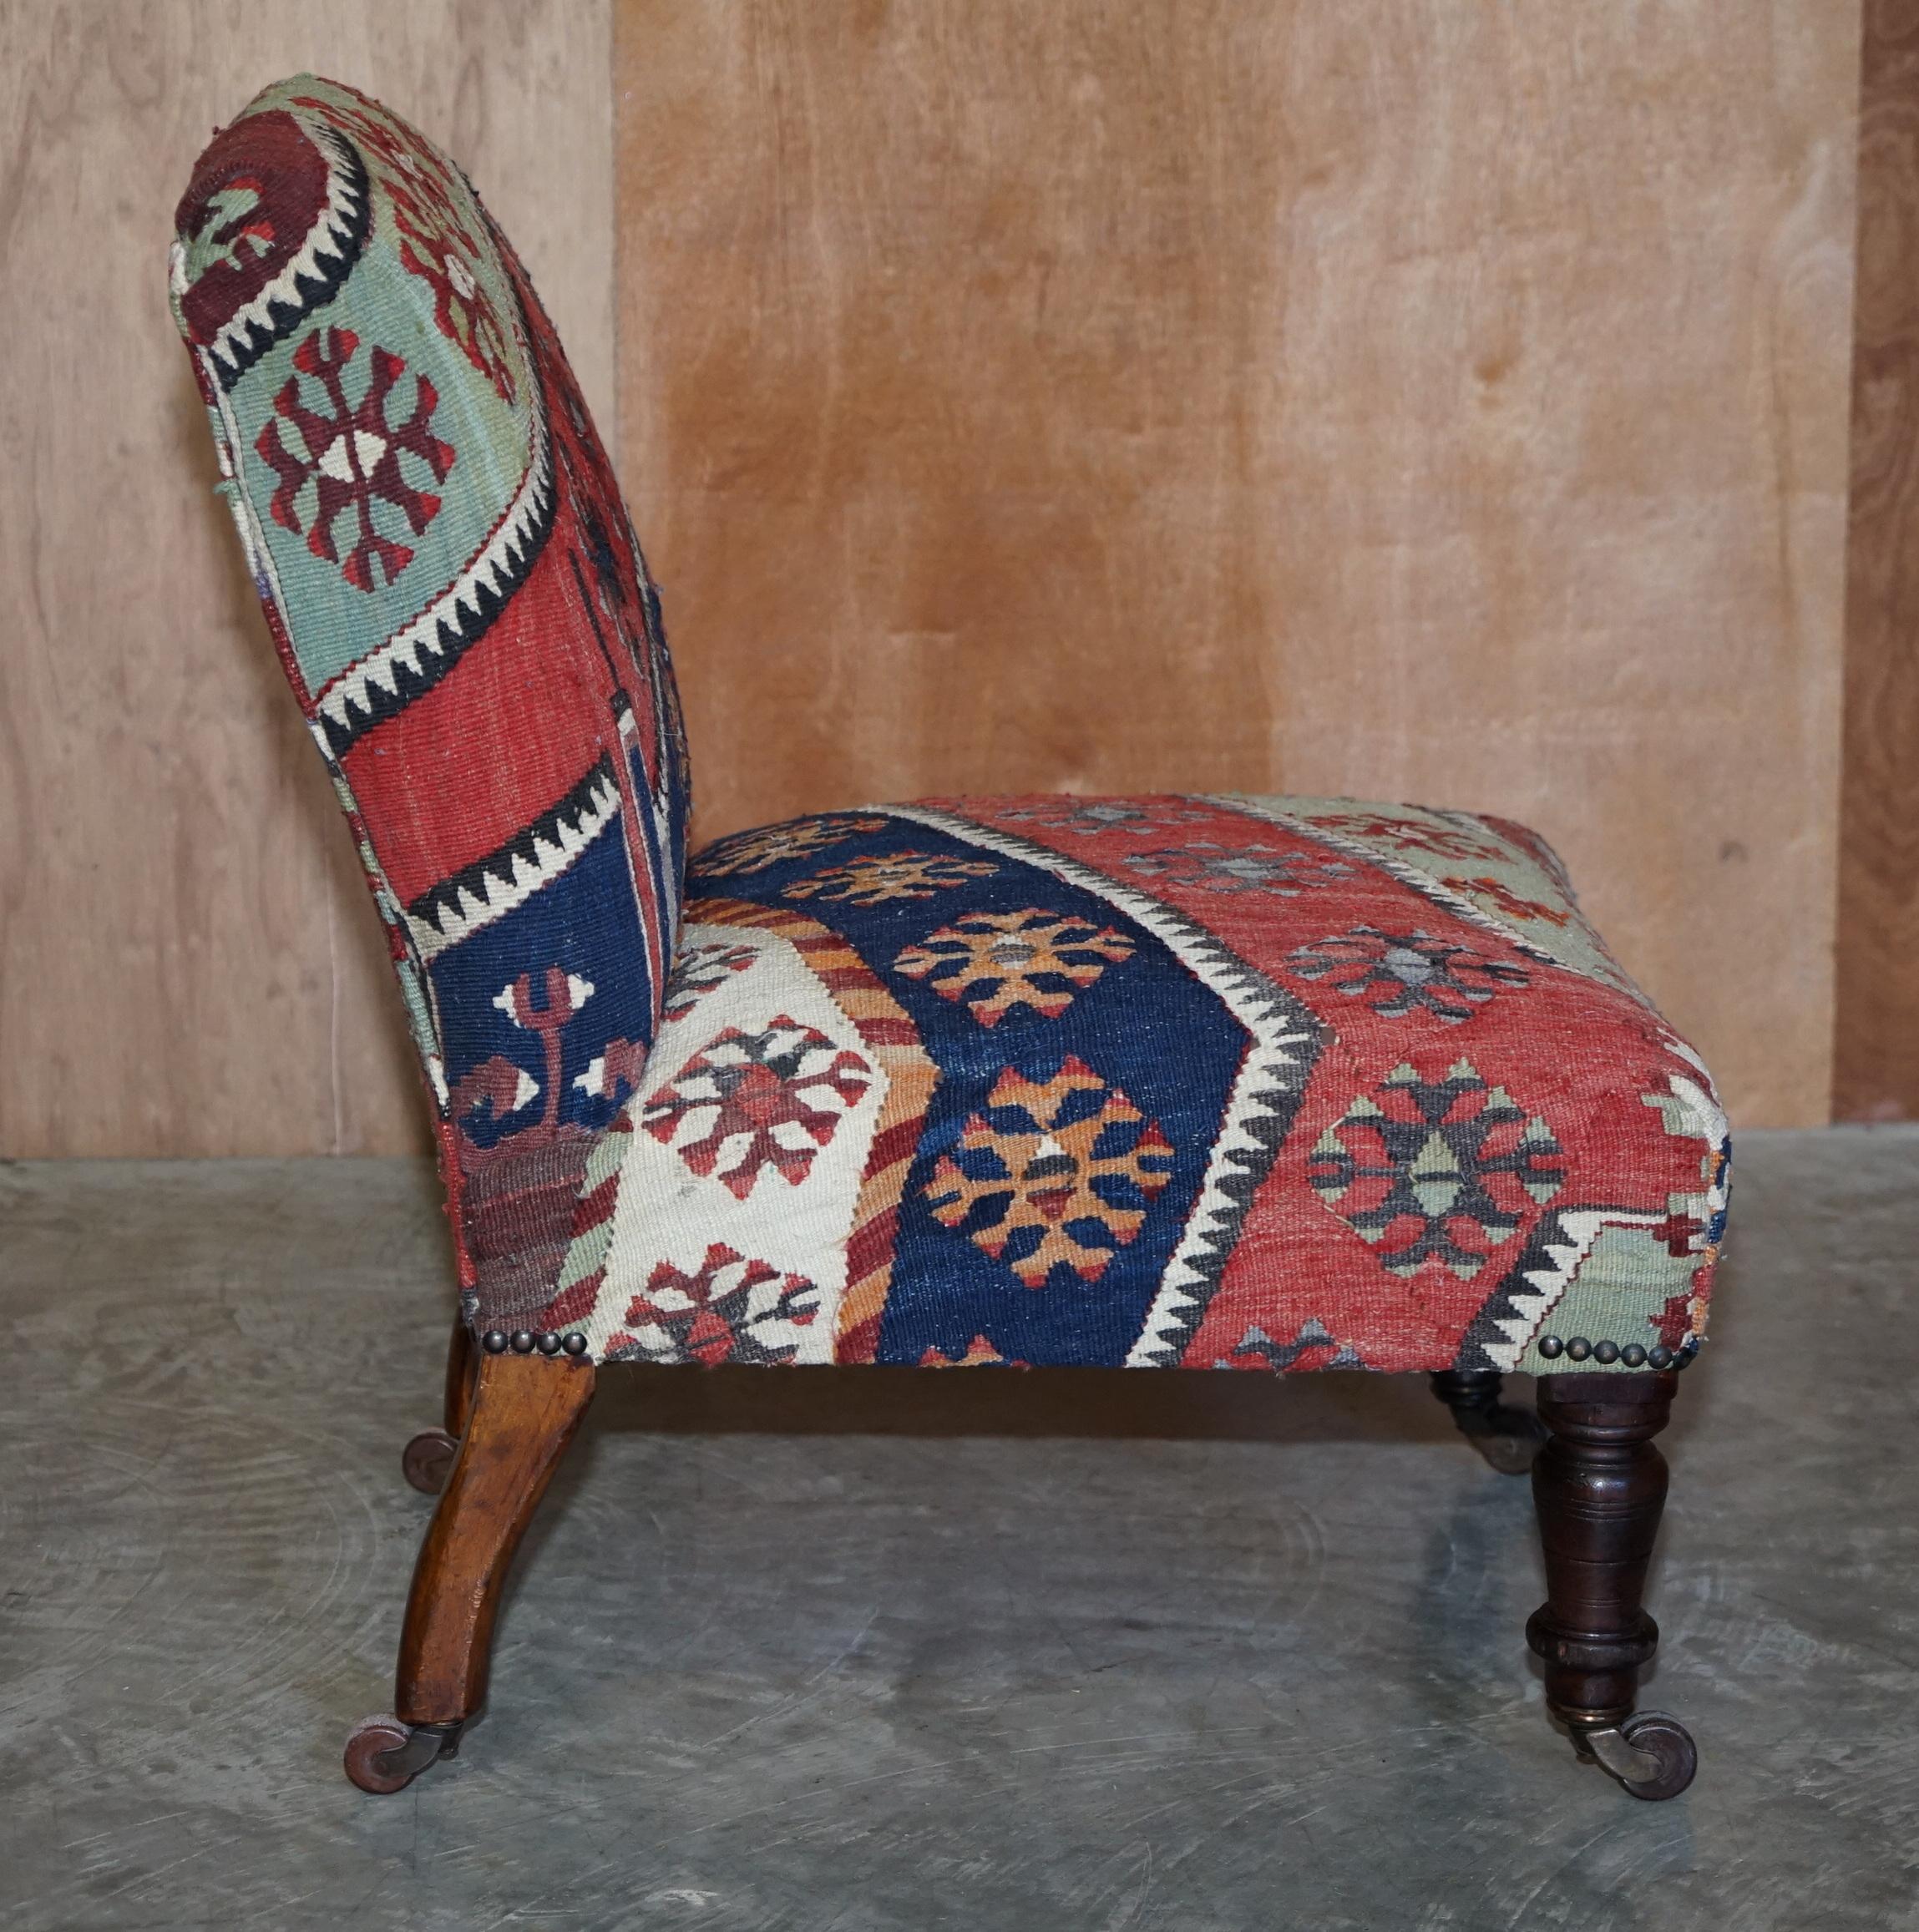 Upholstery Stunning Original Antique Victorian 1860 Kilim Upholstered Side Occasional Chair